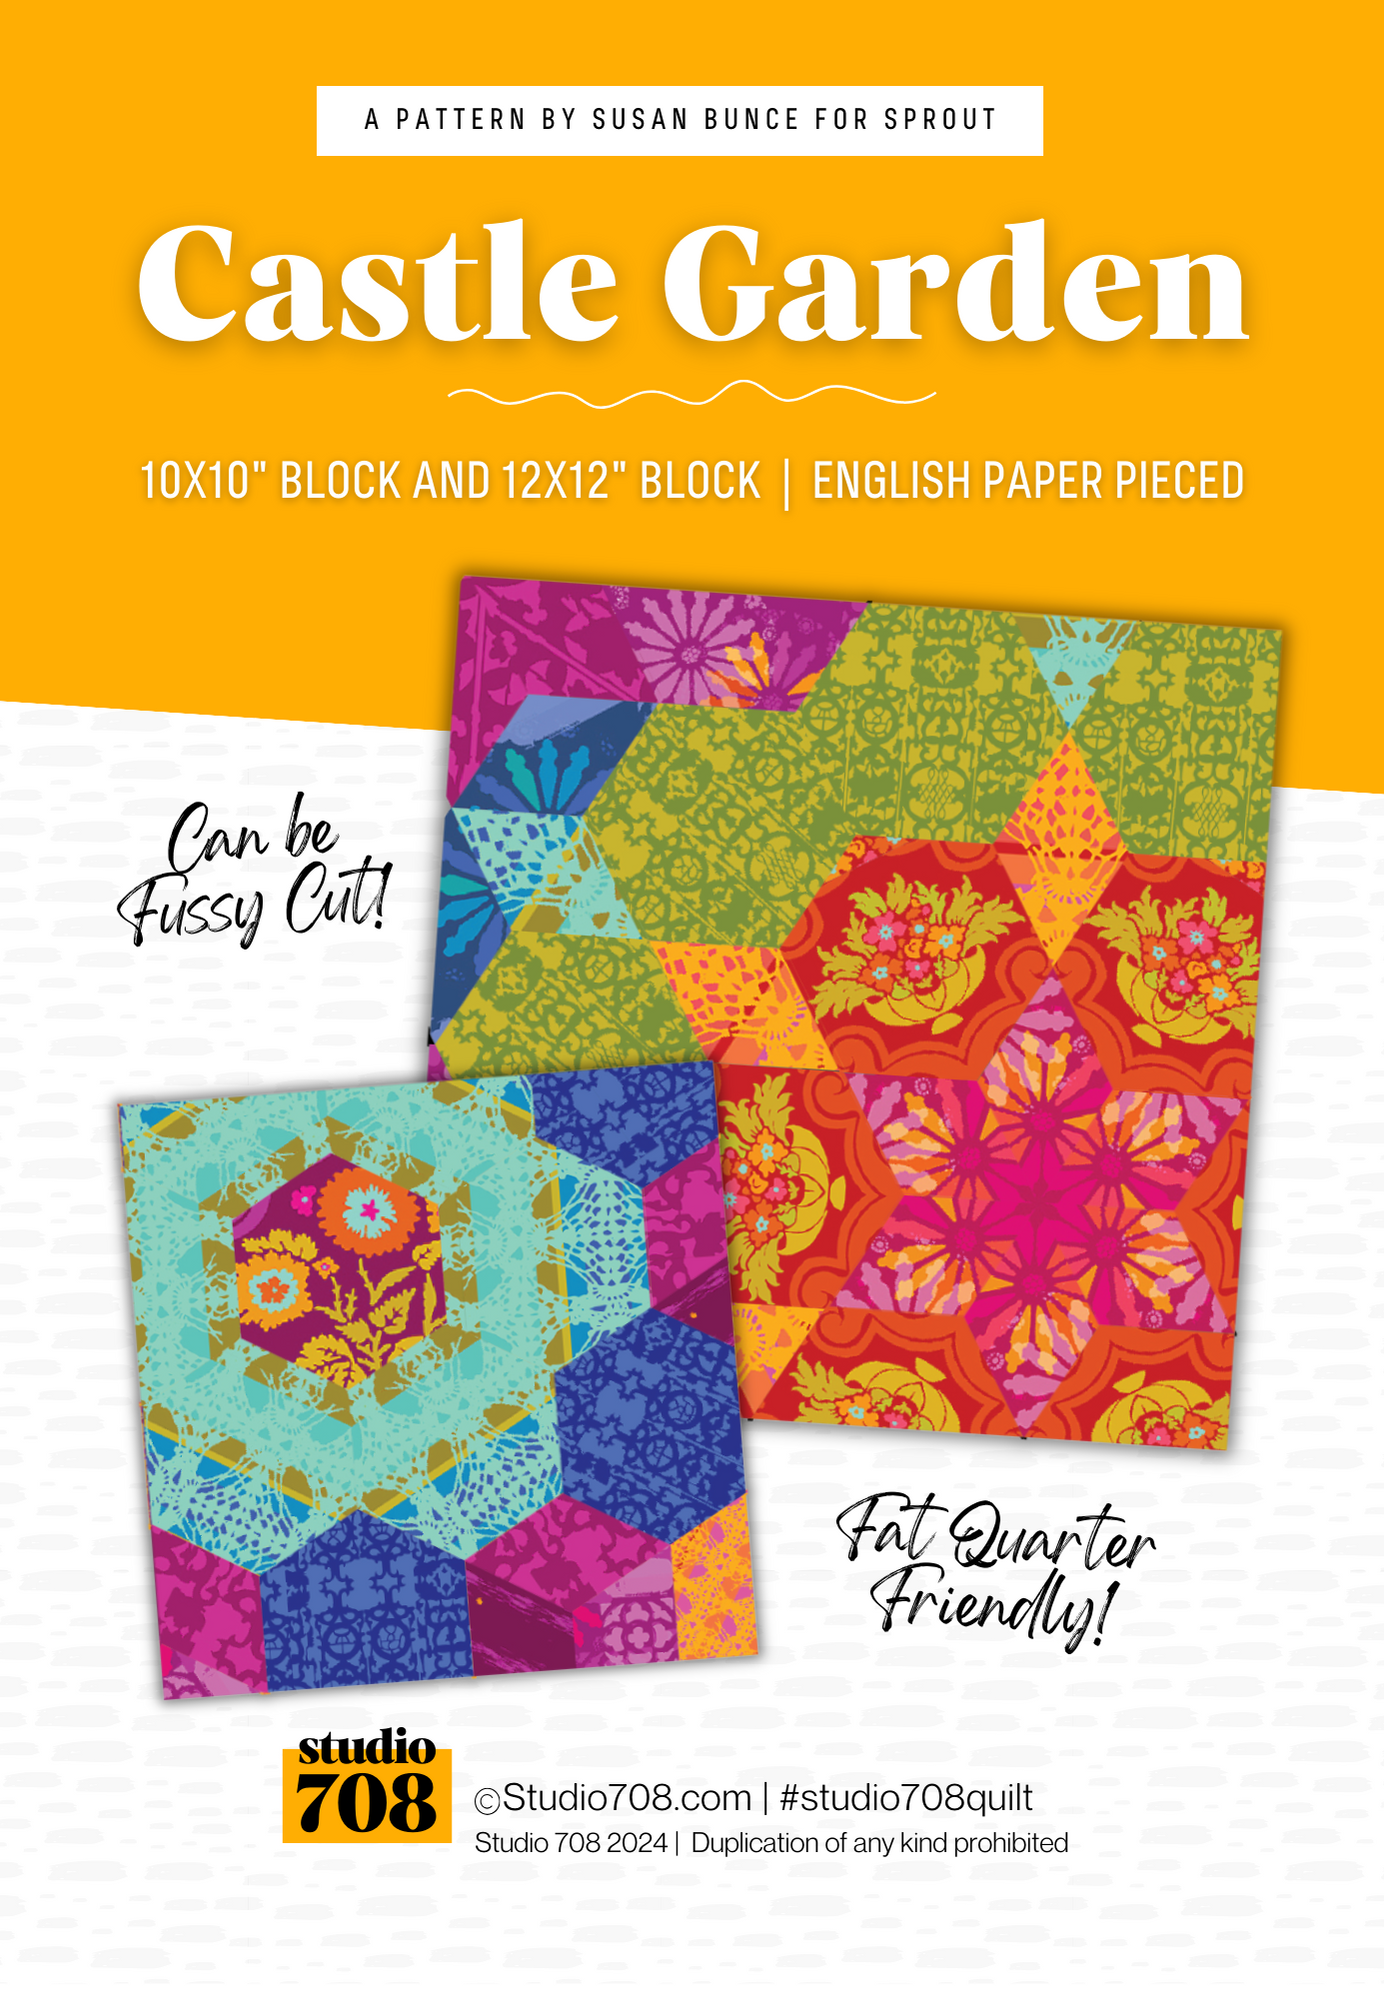 Picture of 2 english paper pieced blocks as the cover for the Castle Garden Quilt pattern